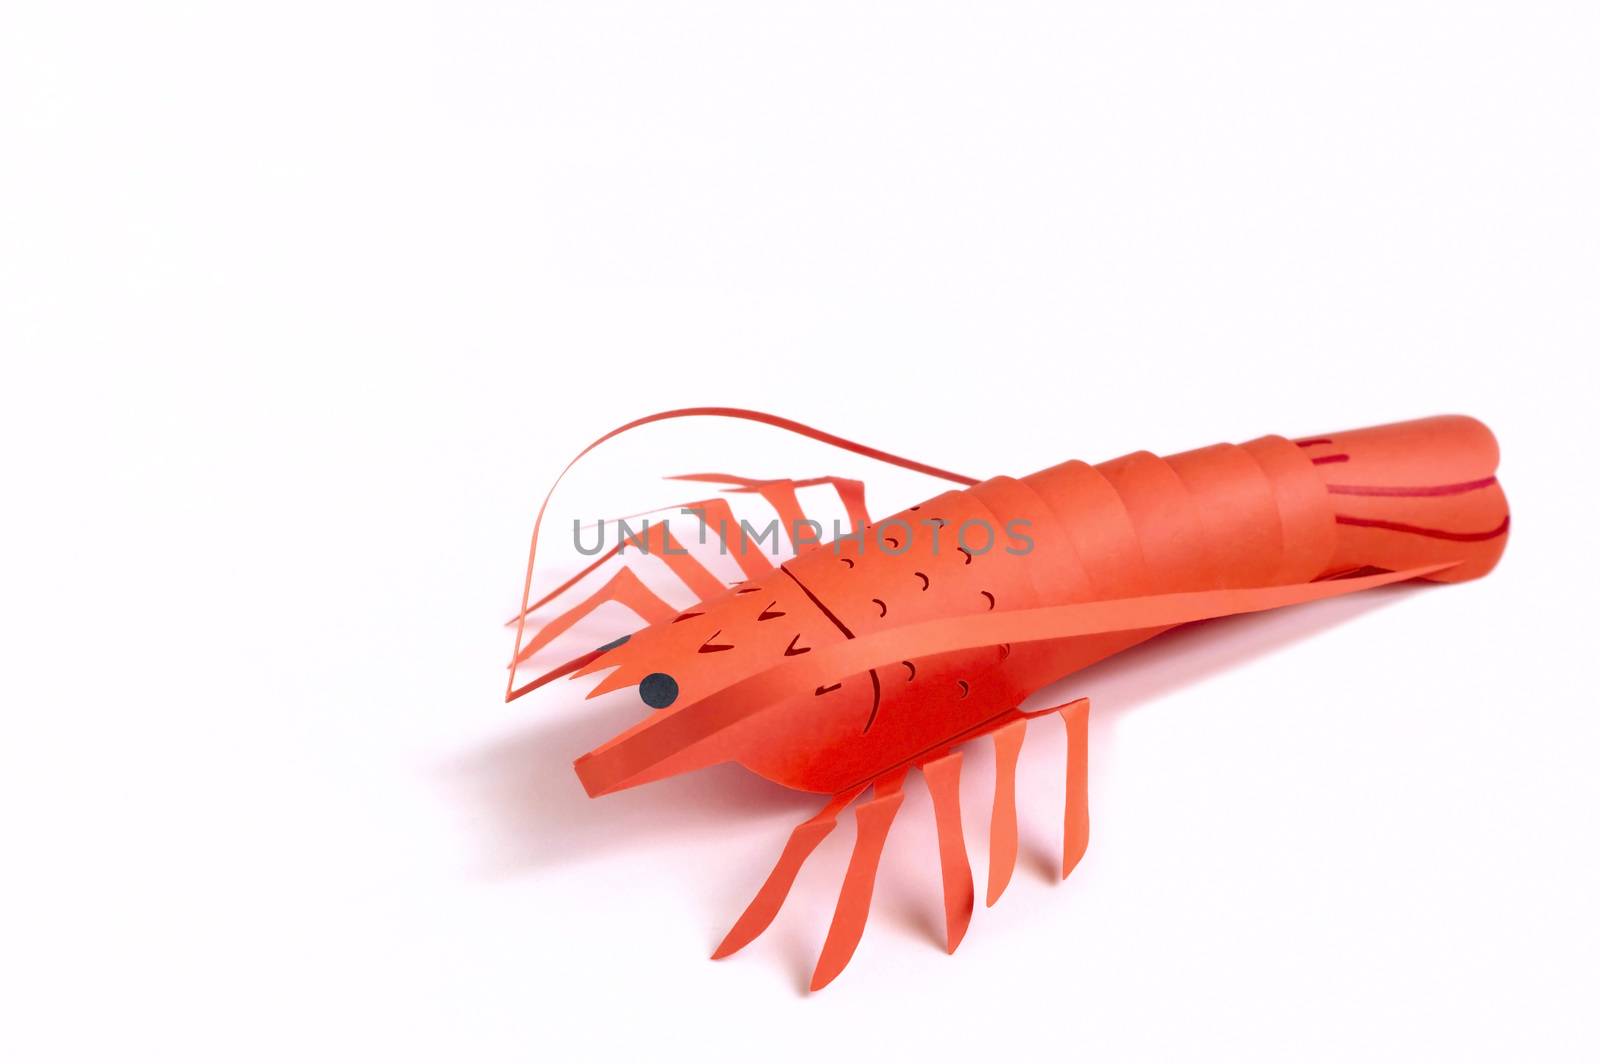 Paper lobster on peach color background. Real volumetric handmade paper objects. Paper art and craft